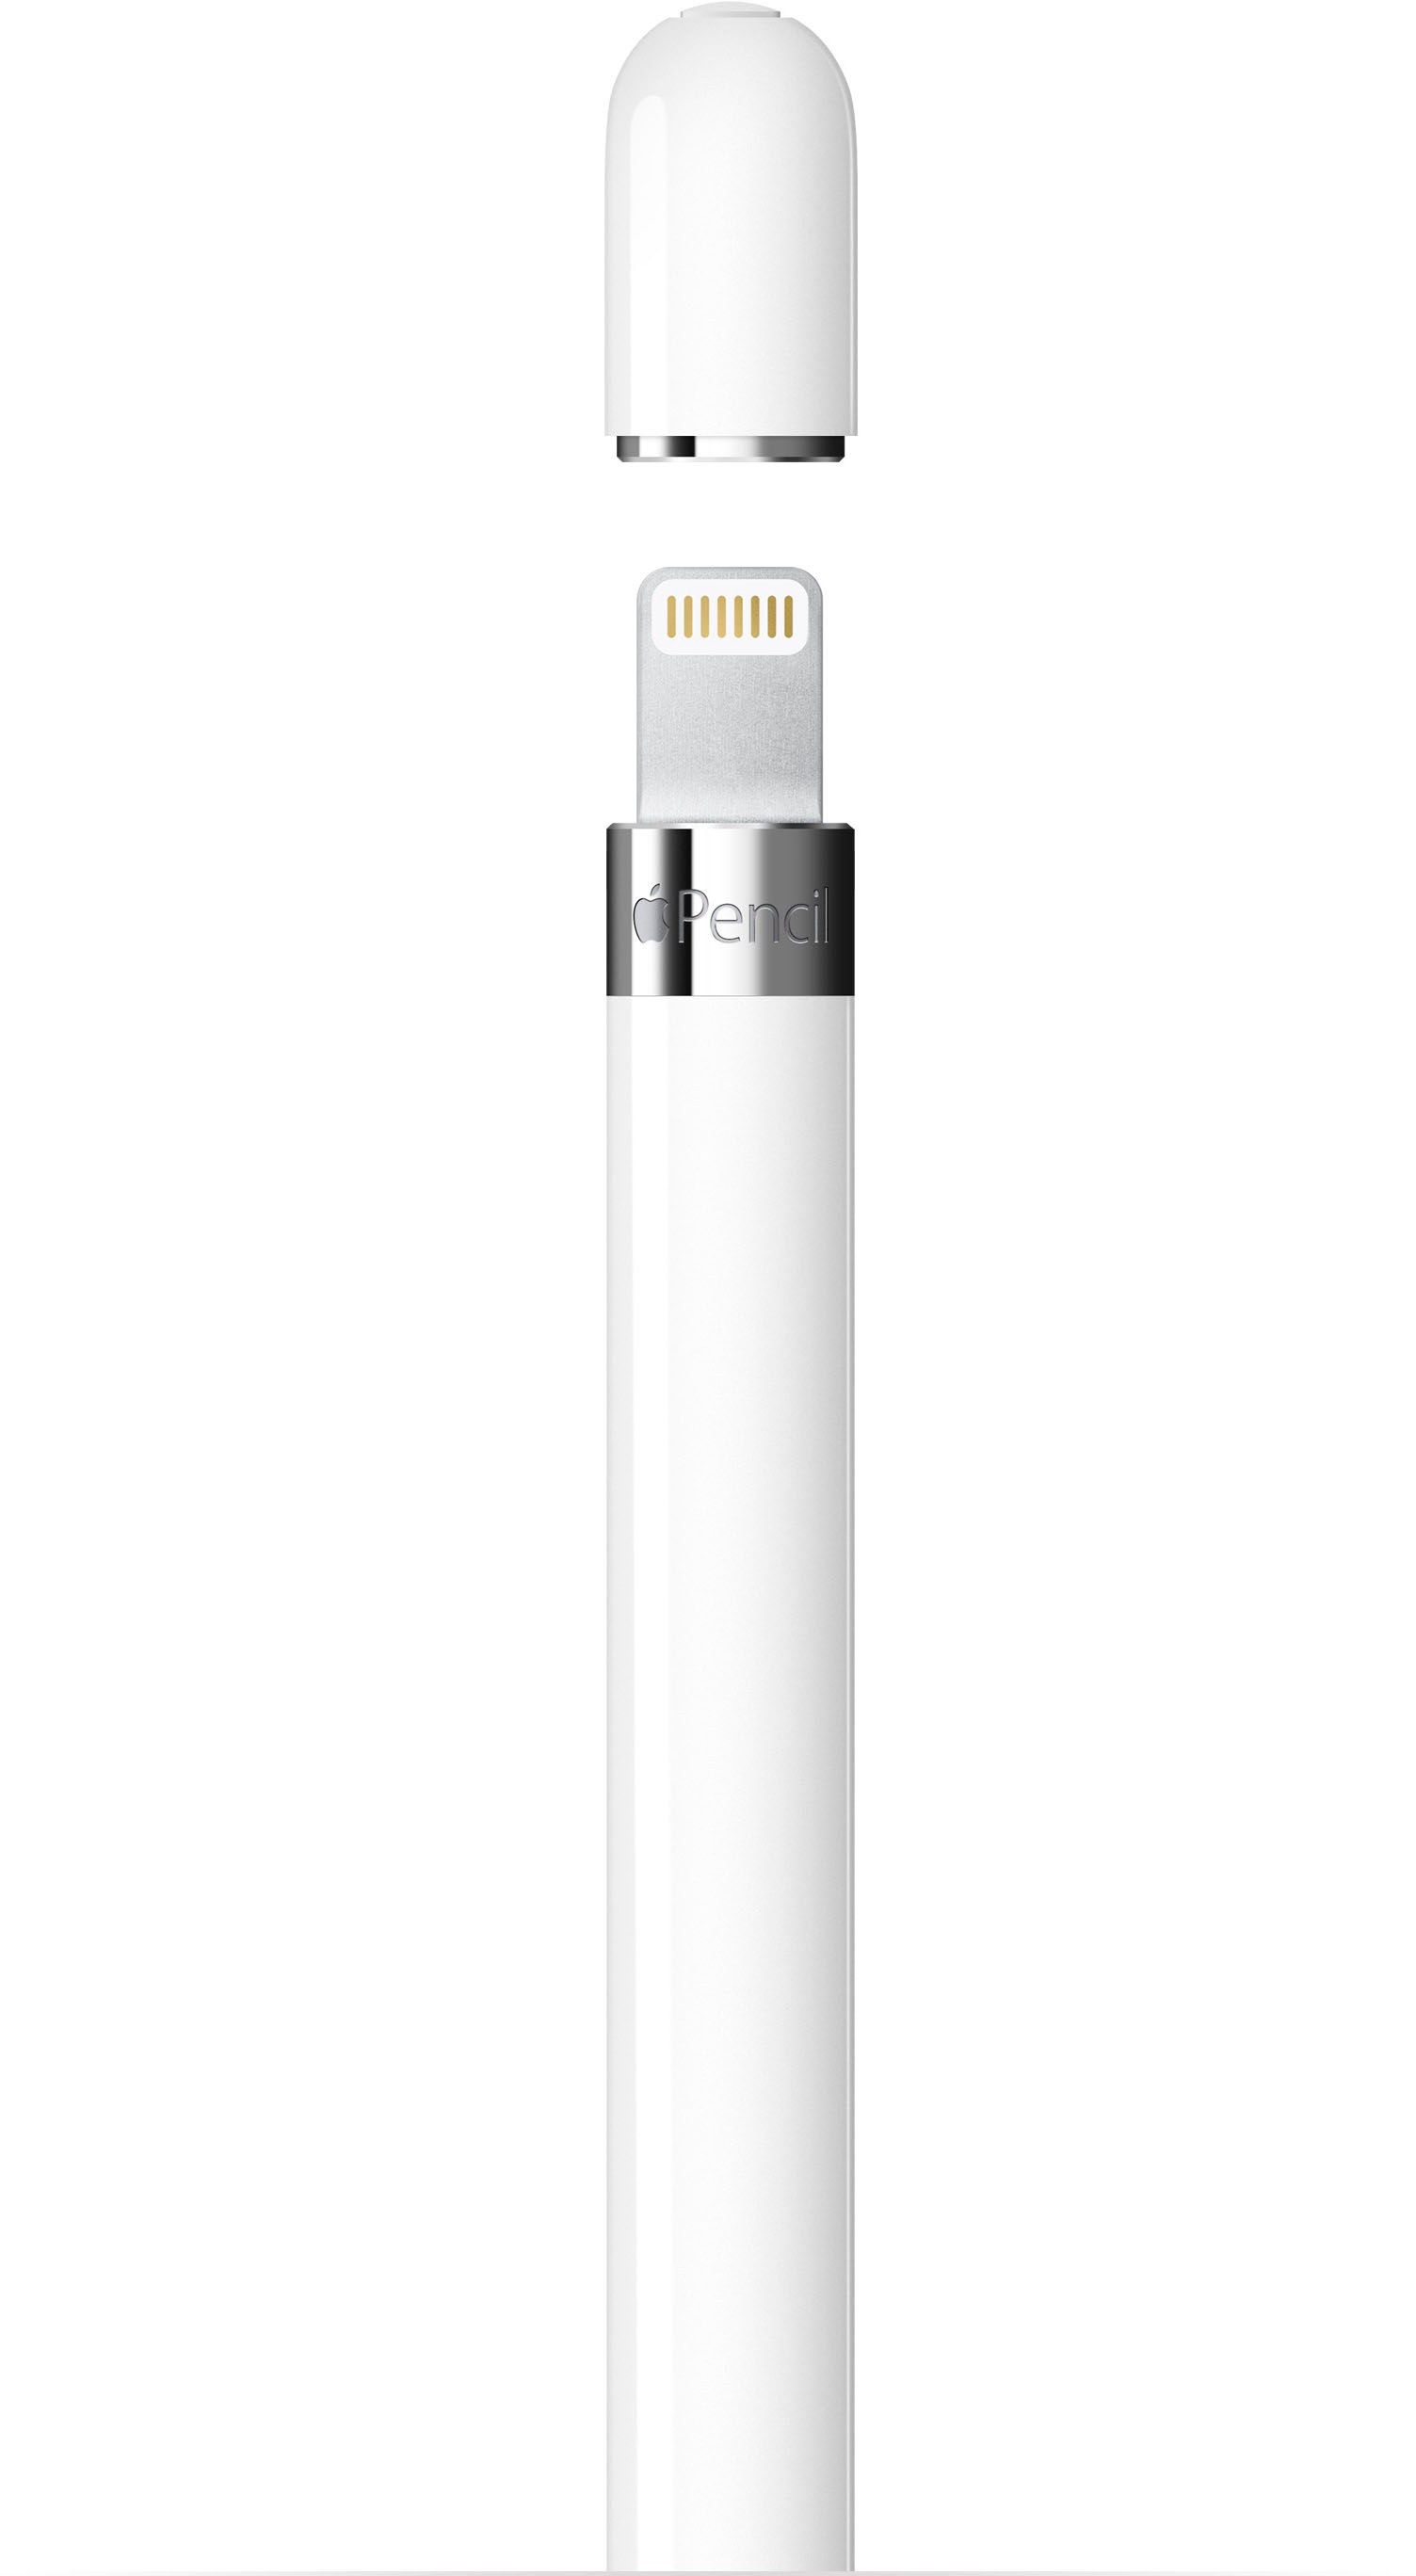 Apple Pencil (1st Generation) with USB-C to Pencil Adapter White